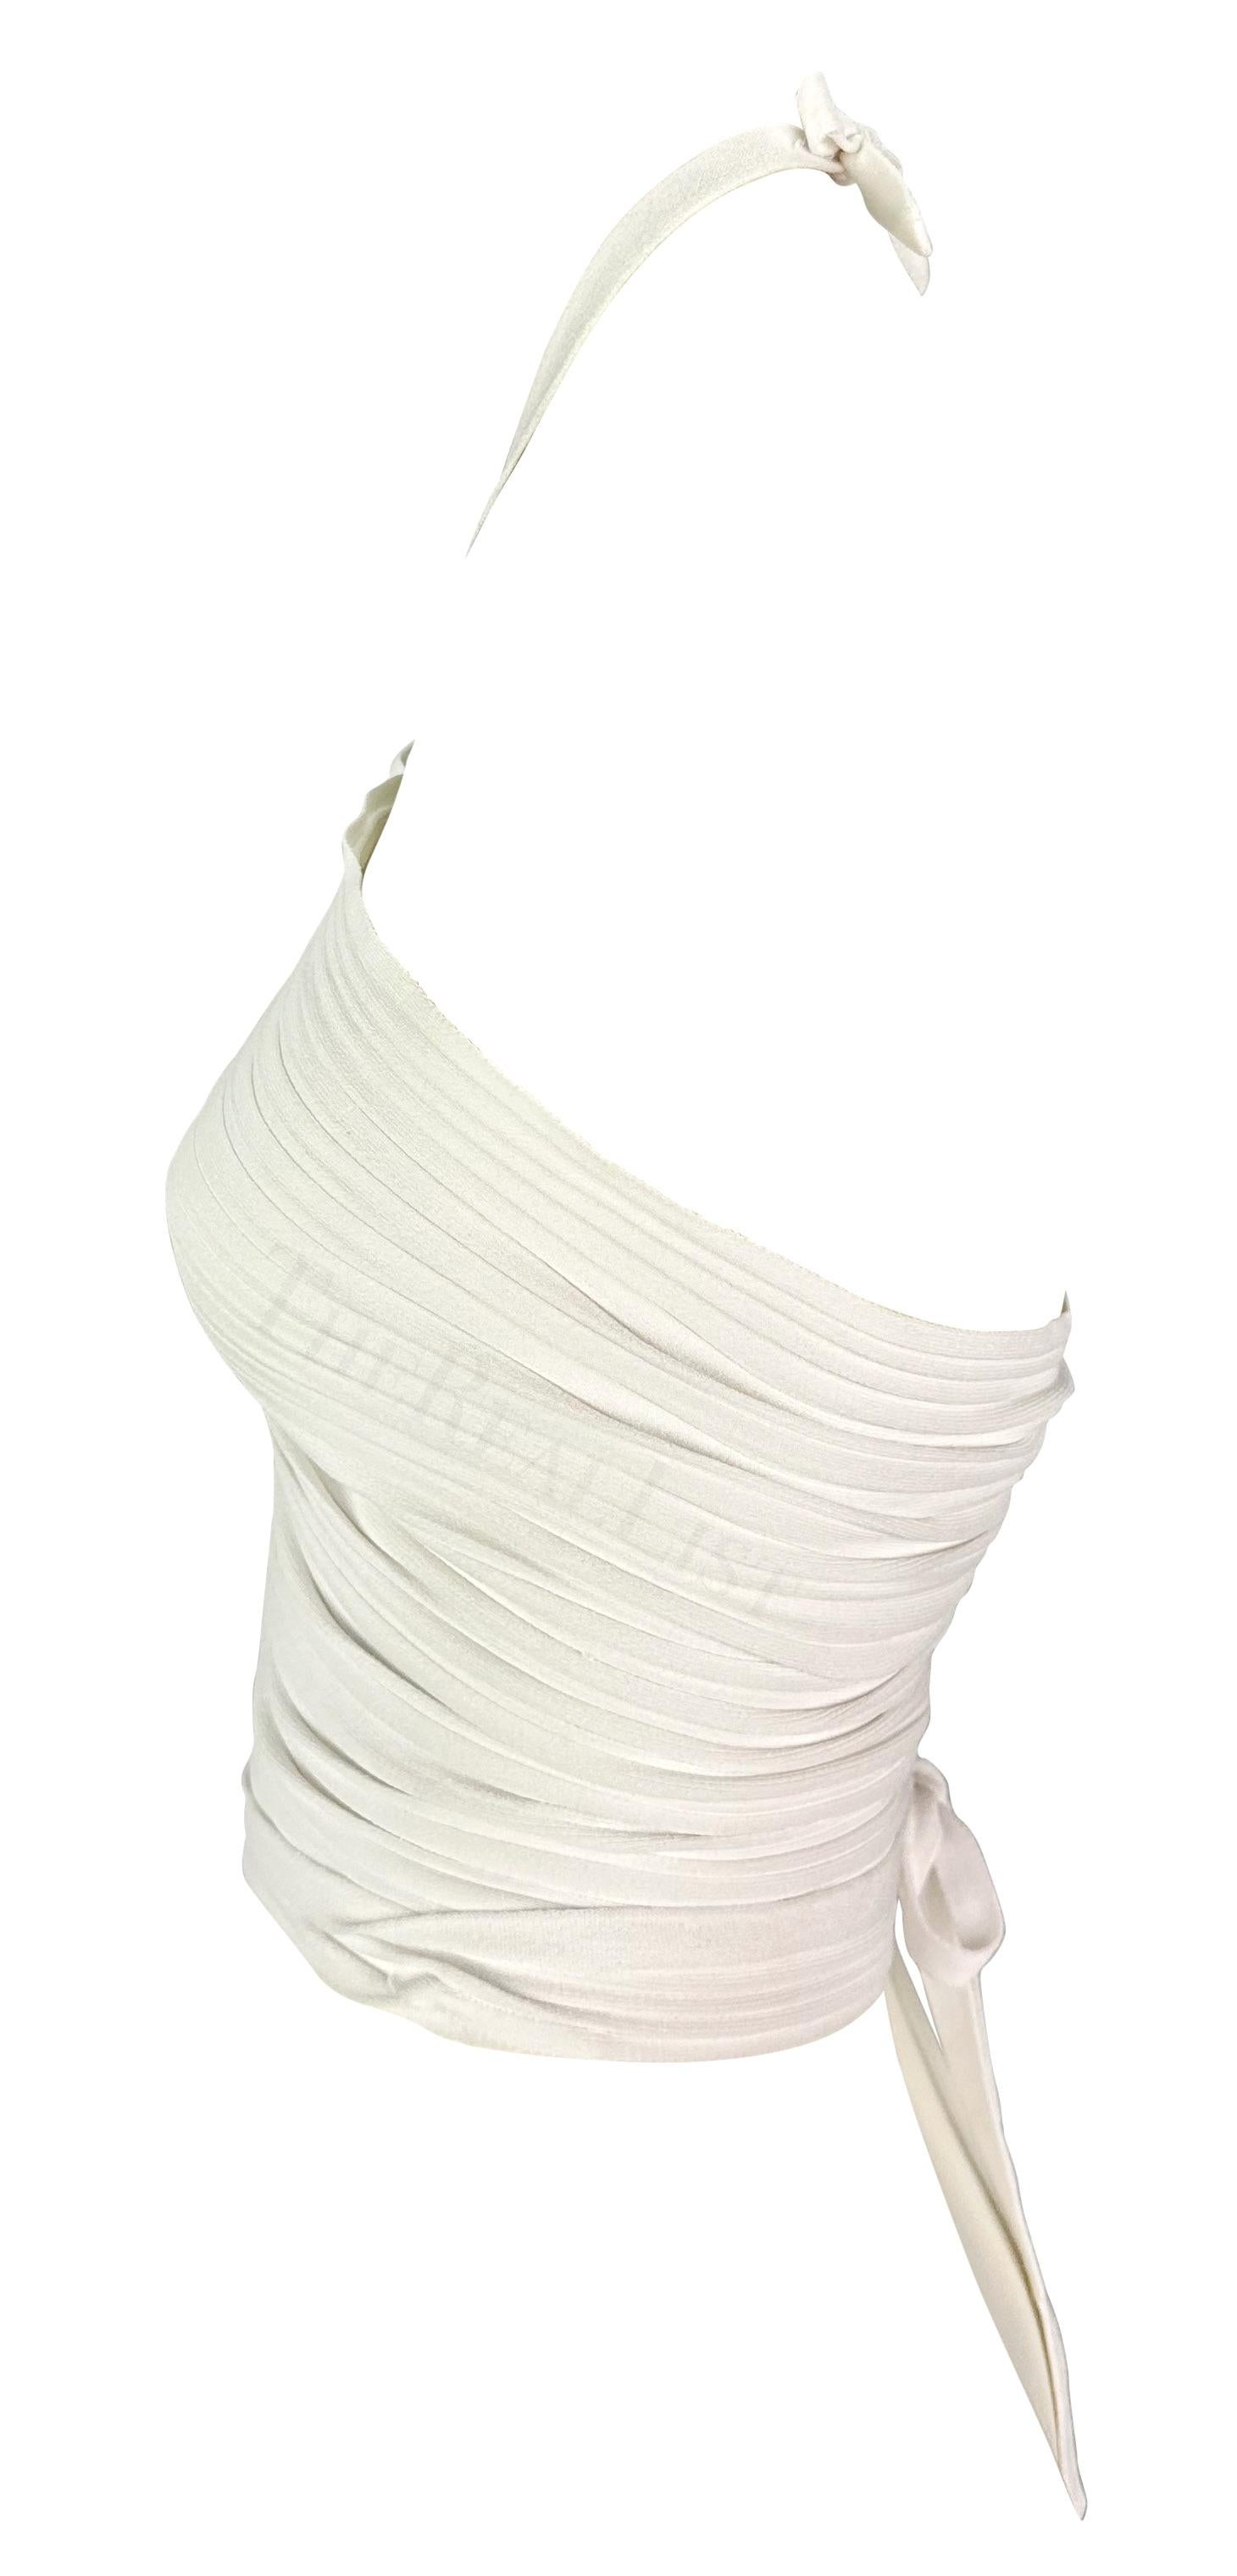 S/S 2000 Gucci by Tom Ford White Ribbed Halter Neck Tank Top In Excellent Condition For Sale In West Hollywood, CA